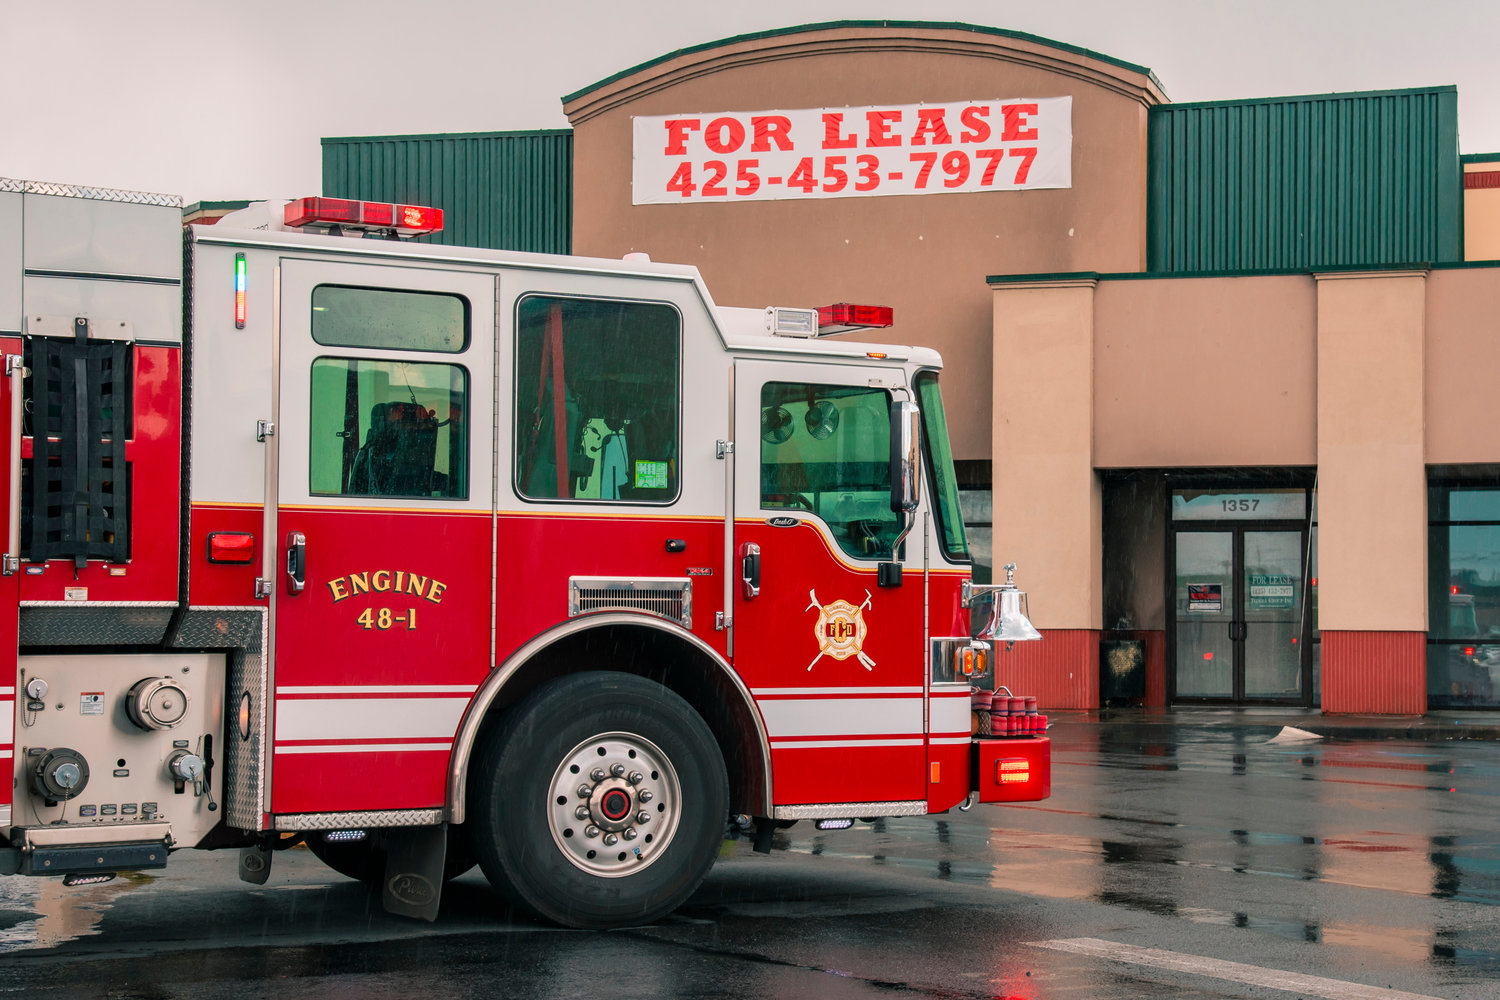 Chehalis Fire responds to the Twin City Town Center shopping plaza after alarms in multiple stores rang for a fire that started in a trash bin and triggered outside sprinkler systems on Wednesday.